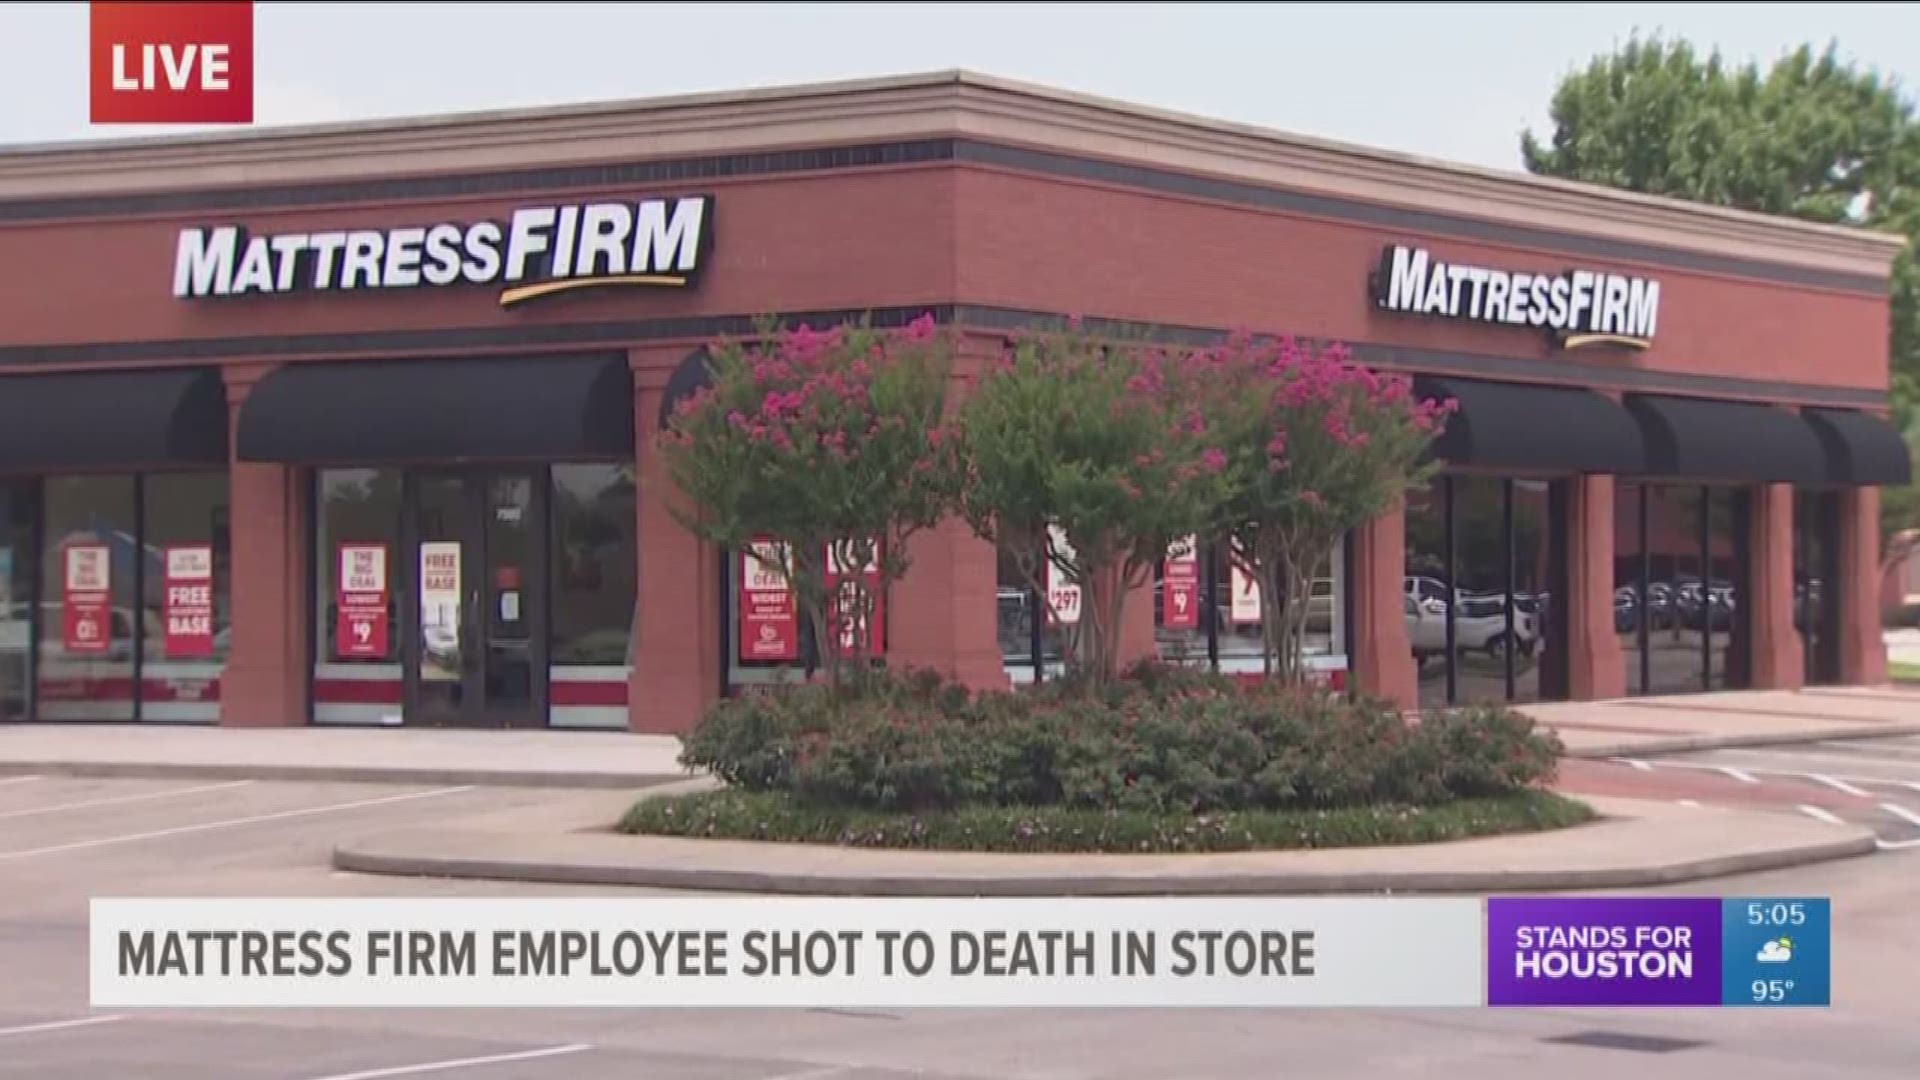 Allie Barrow, 28, a Mattress Firm employee, was shot and killed inside a Houston store over the weekend. 